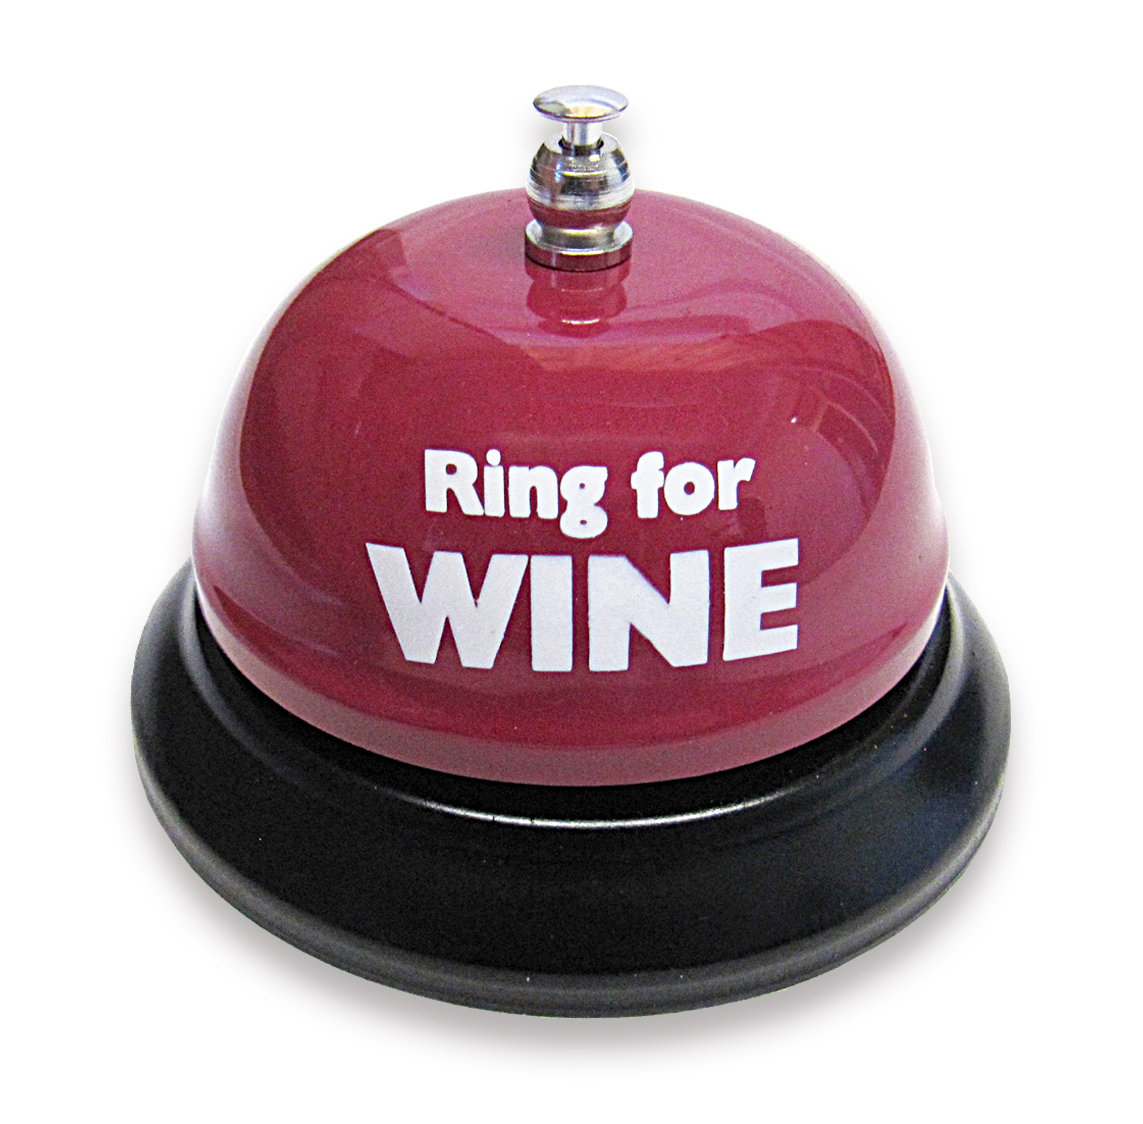 Ring for WINE - Table Bell